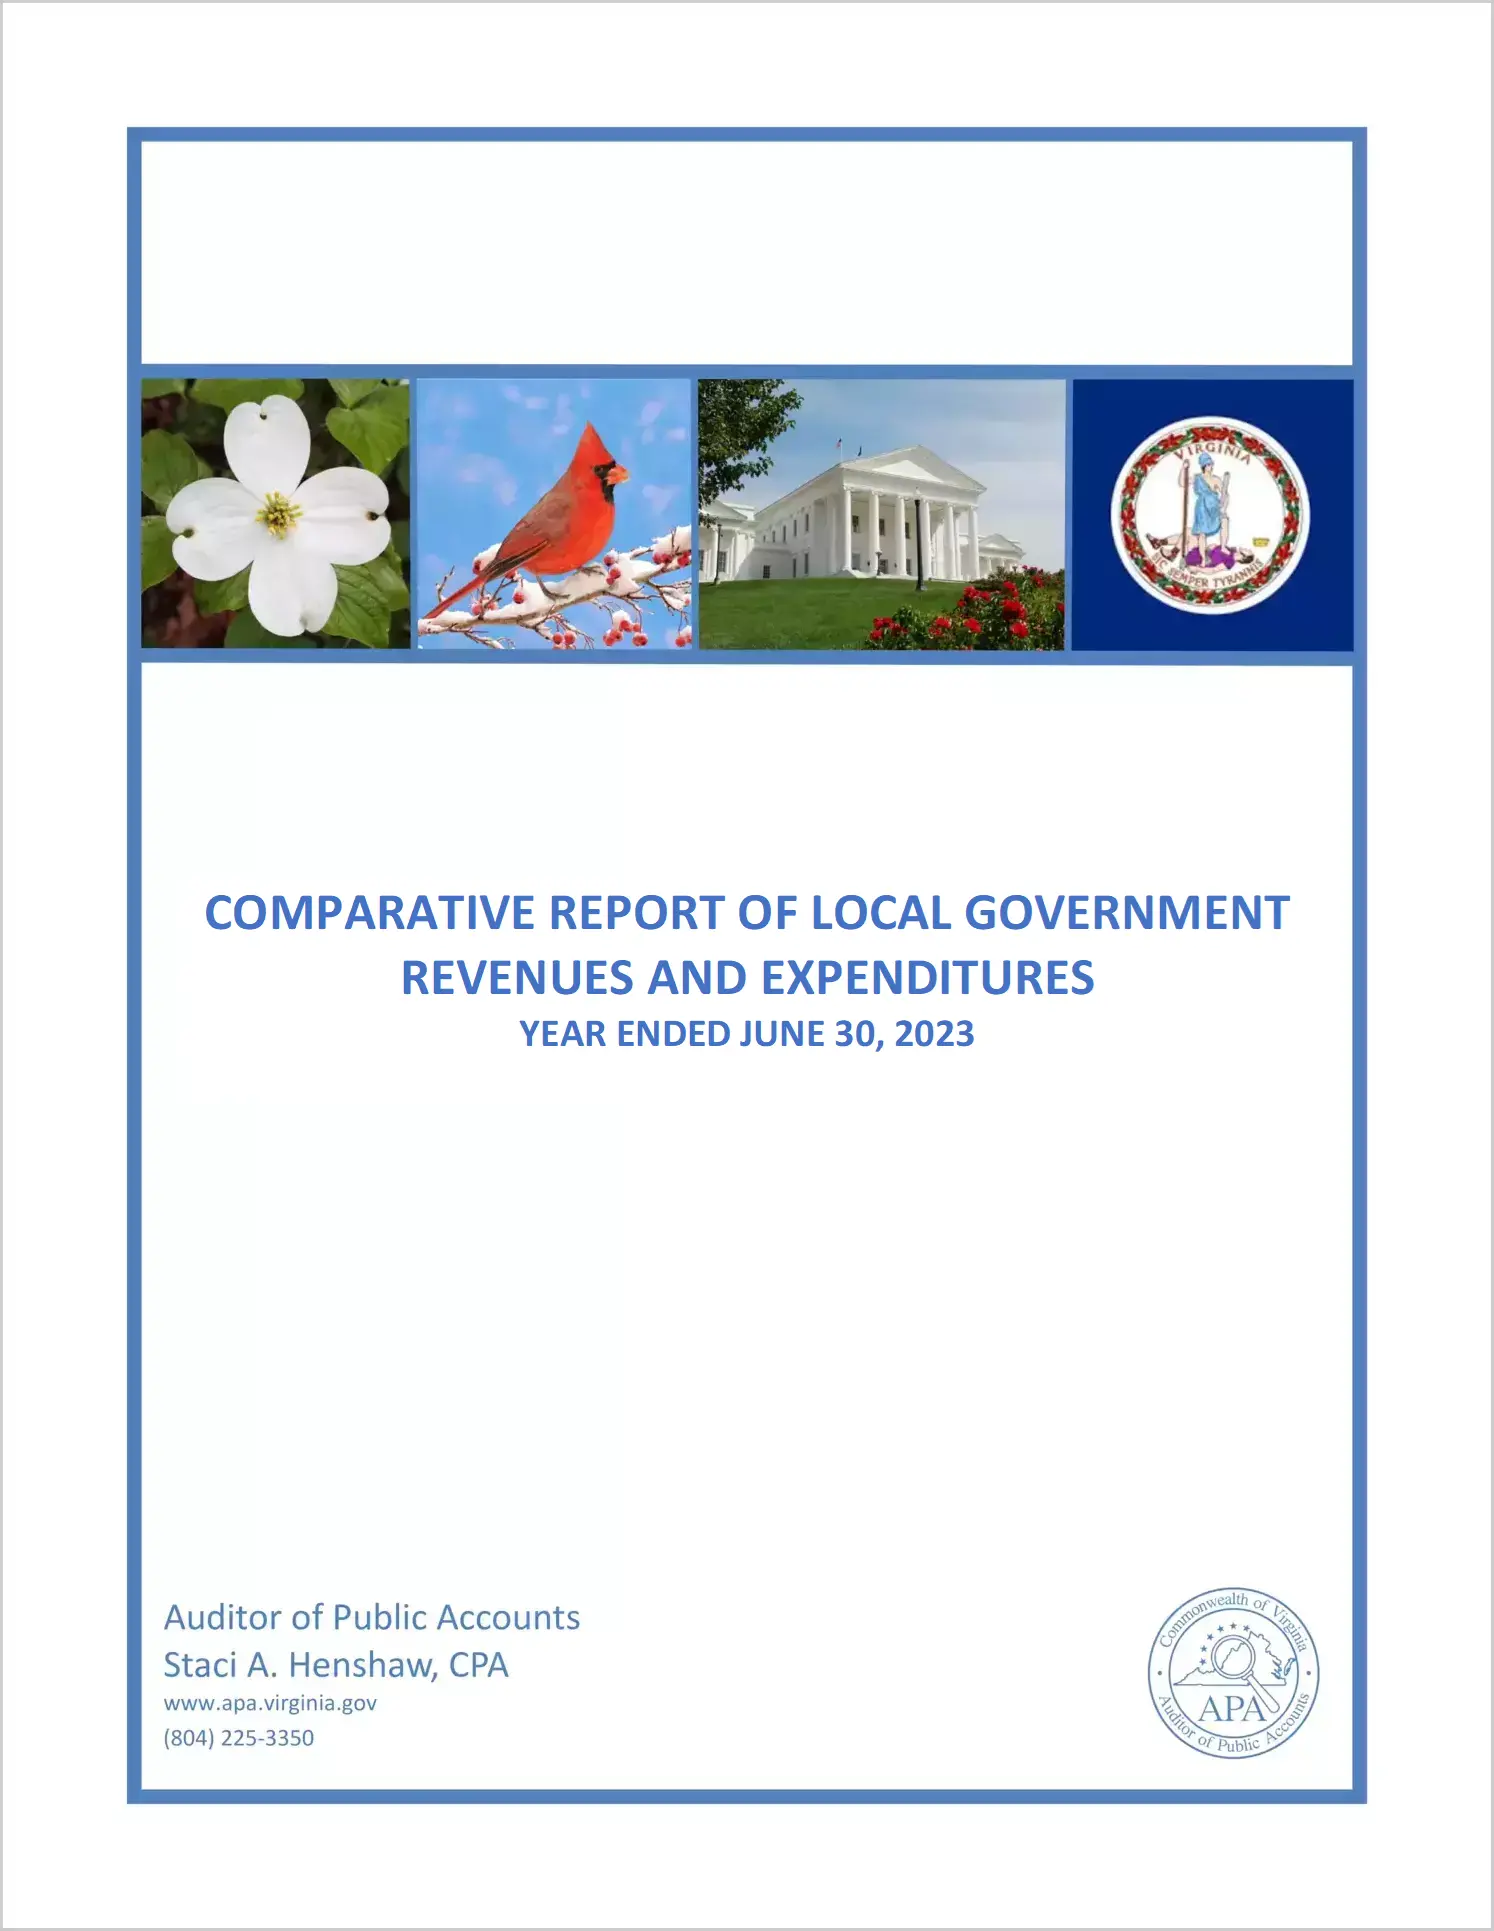 2023 Comparative Report of Local Government Revenues and Expenditures